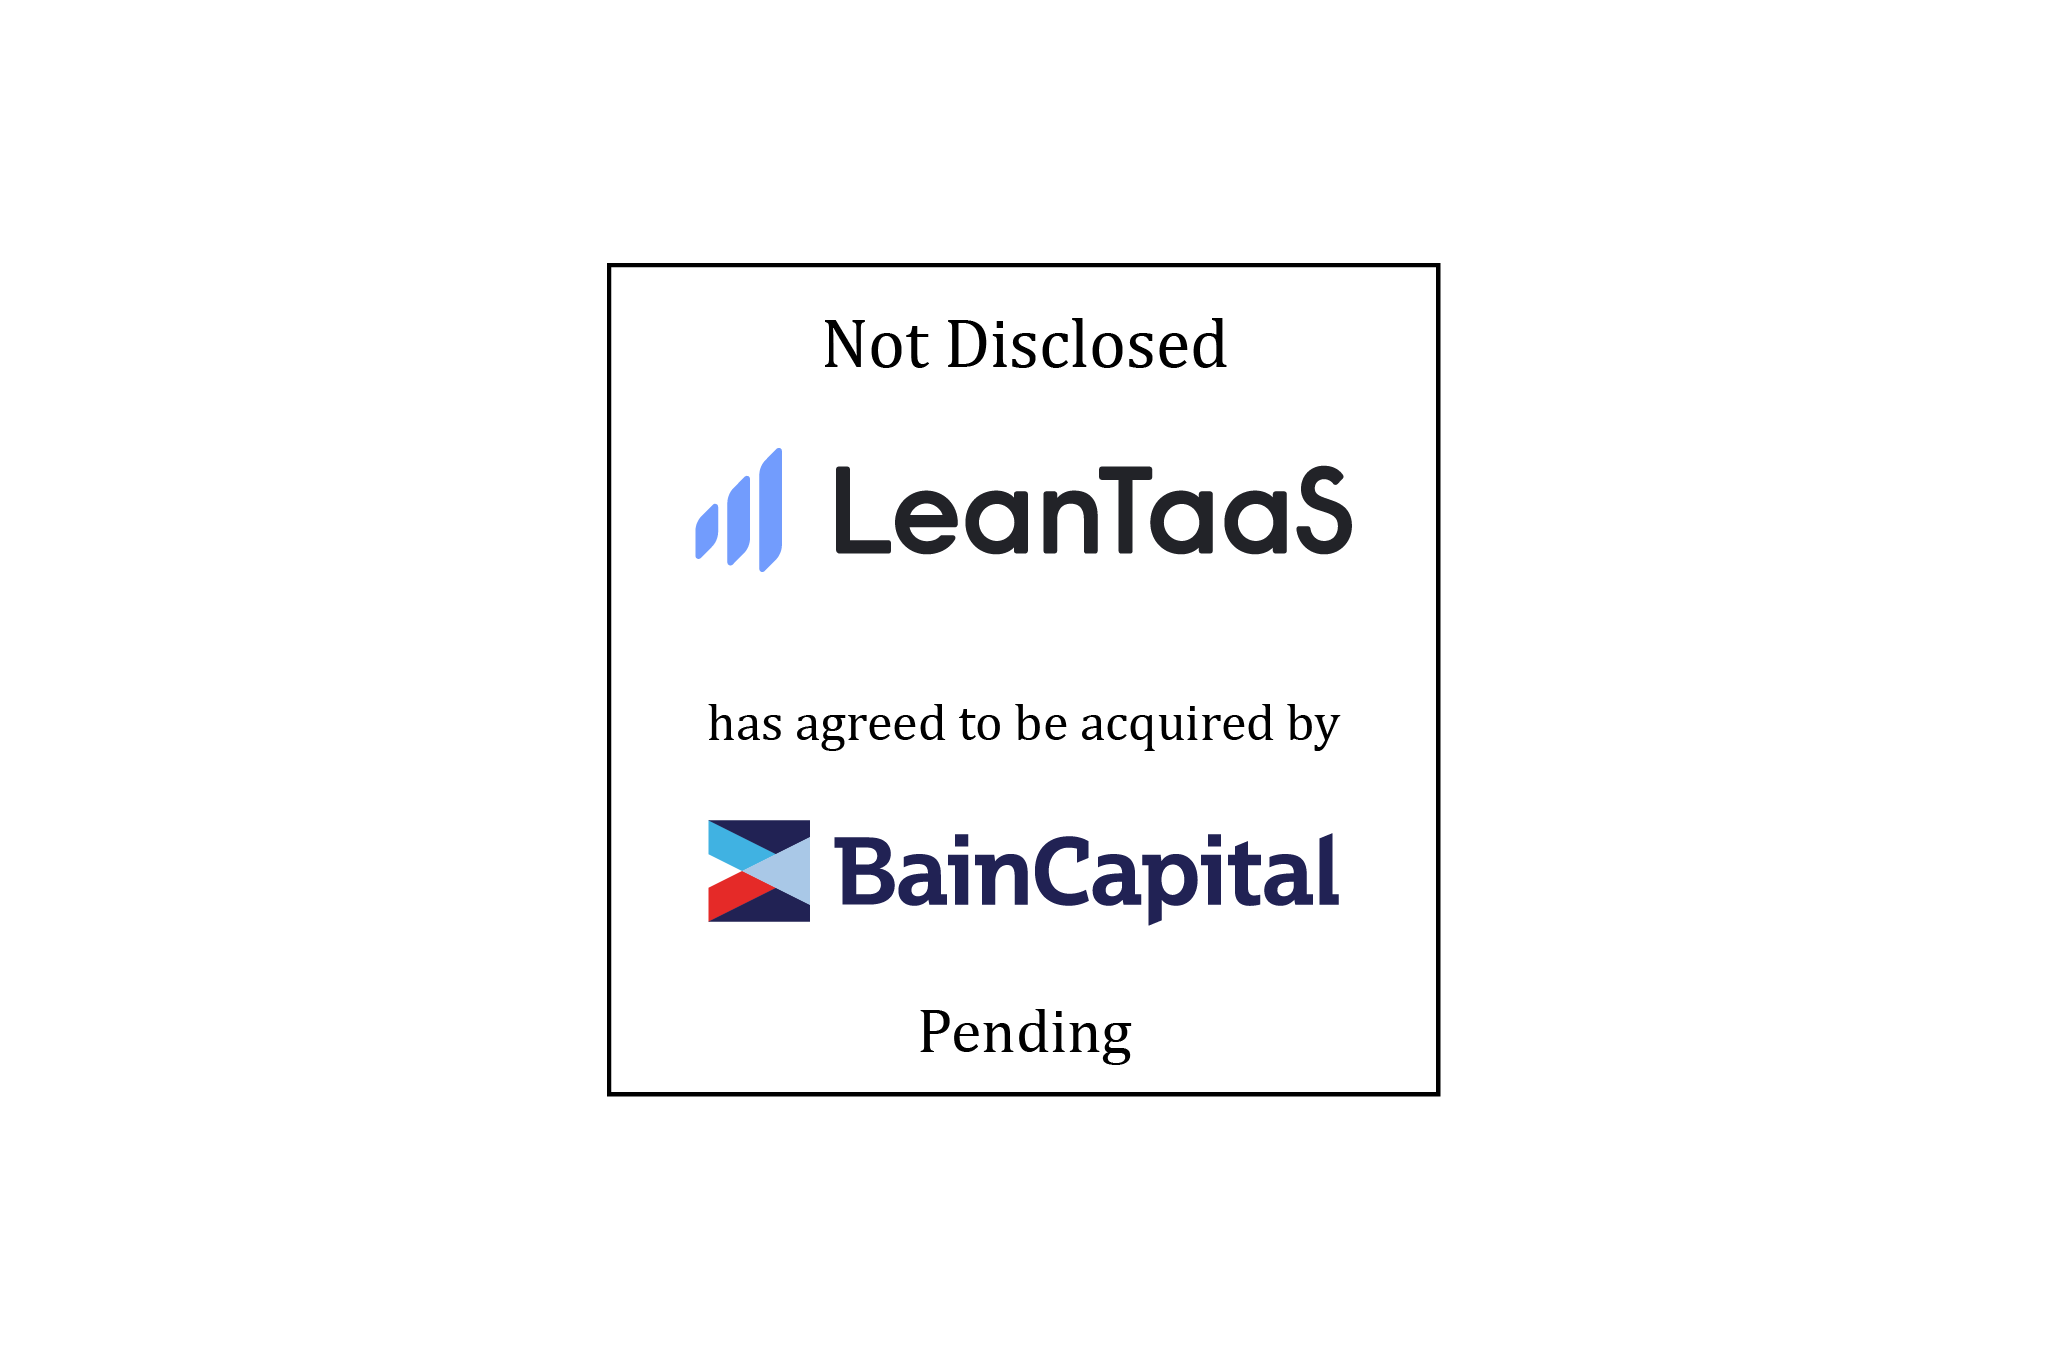 LeanTaas (logo) has agreed to be acquired by Bain Capital (logo) | Pending